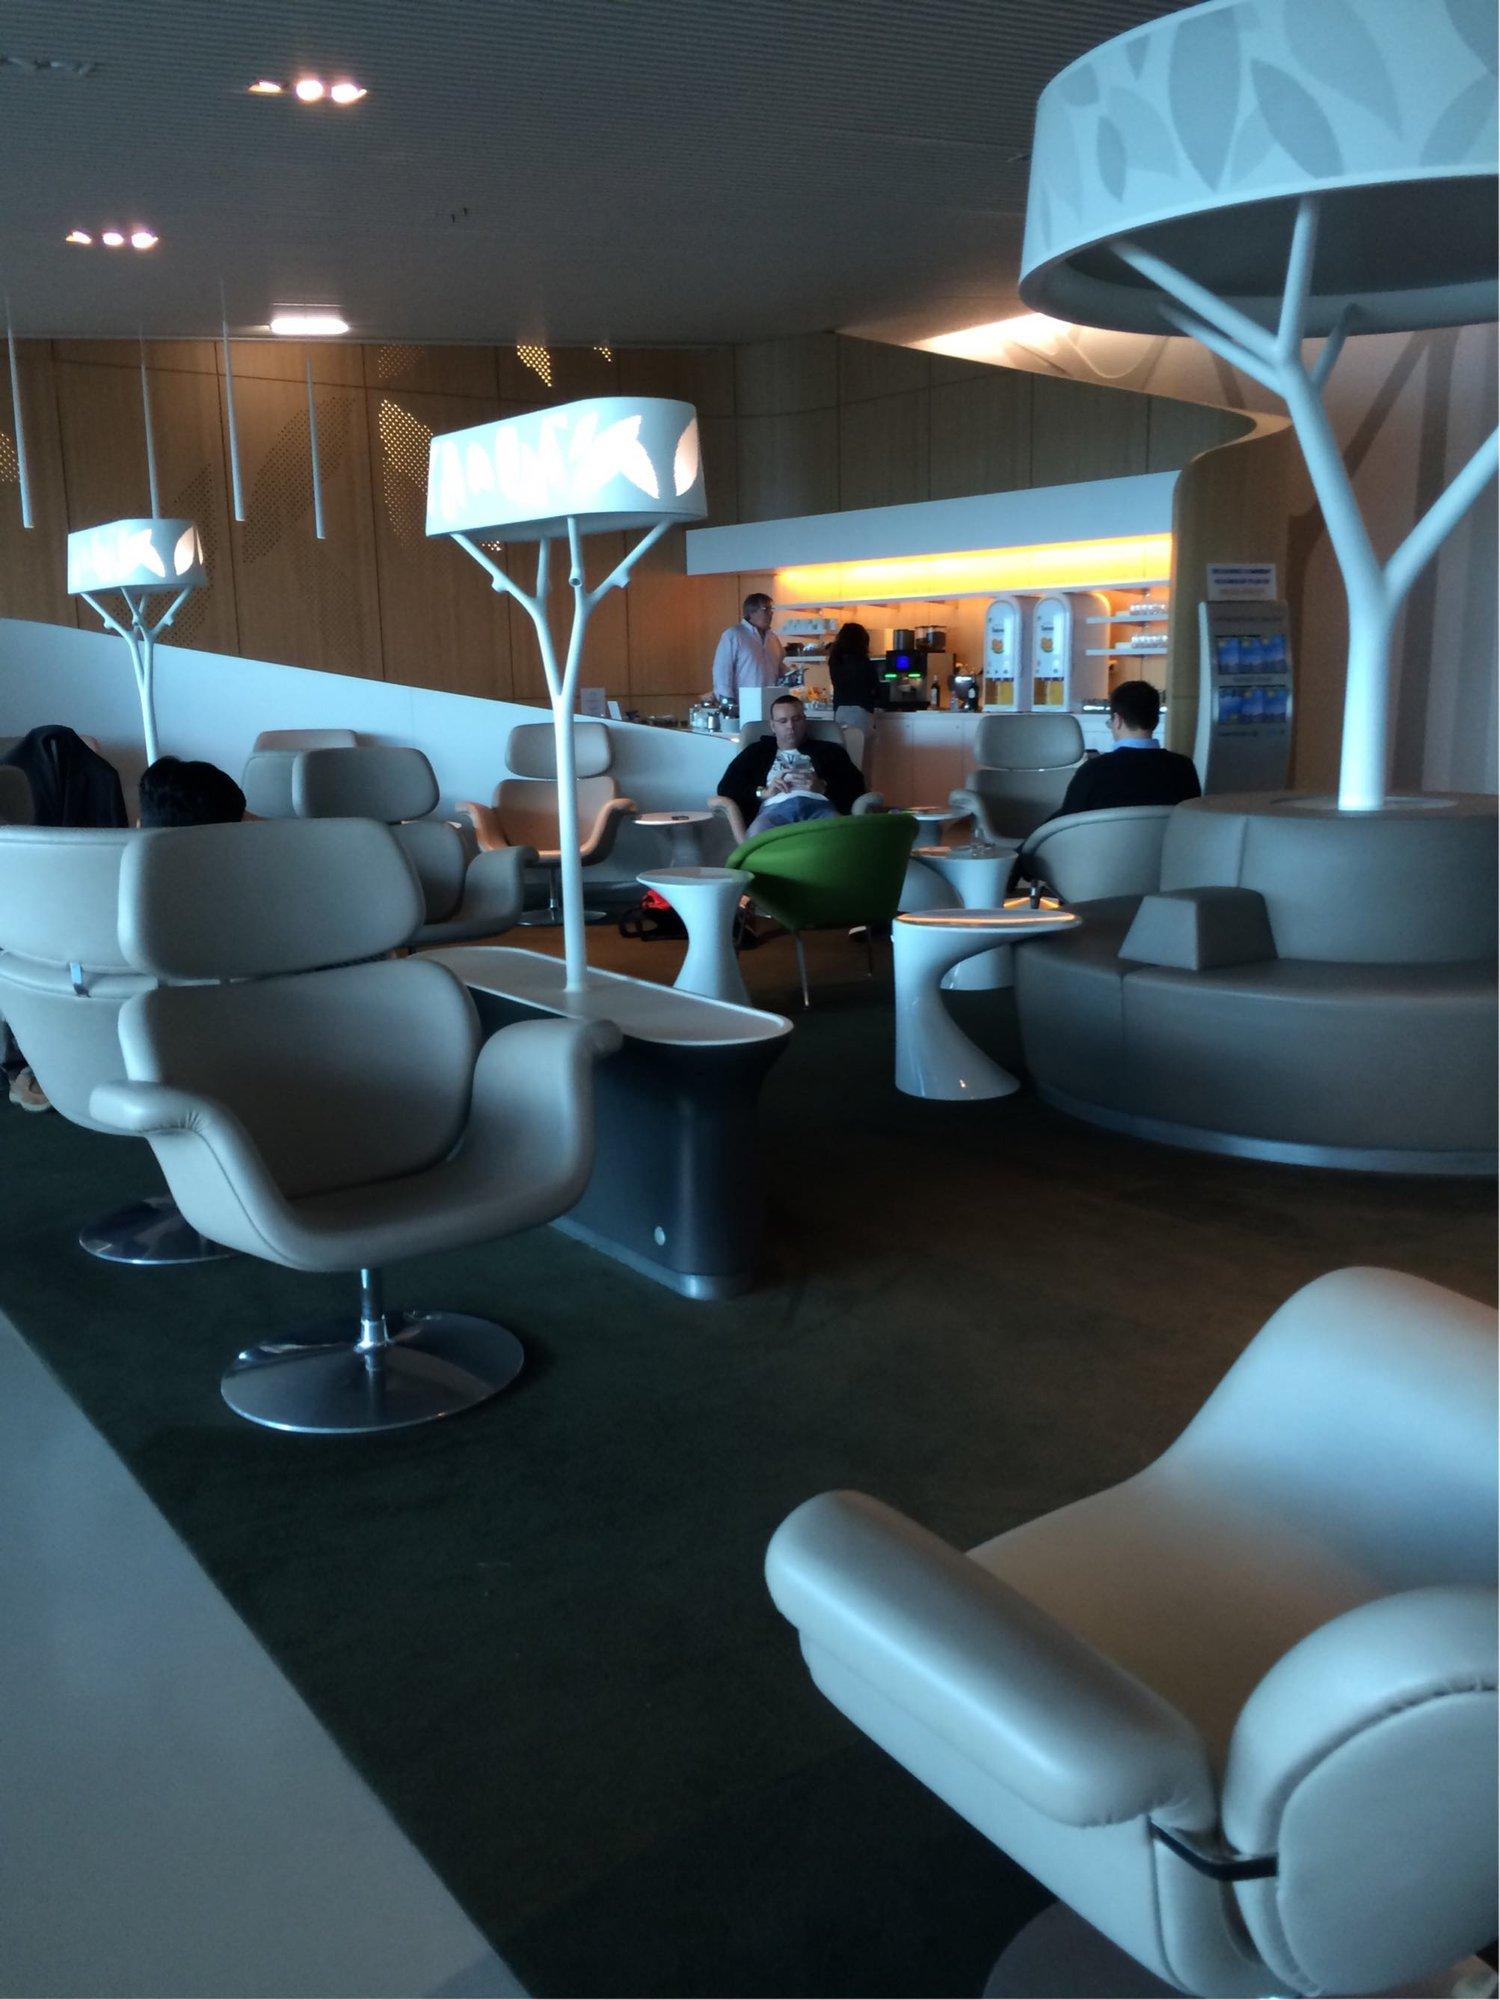 Air France Lounge (Concourse M) image 2 of 17